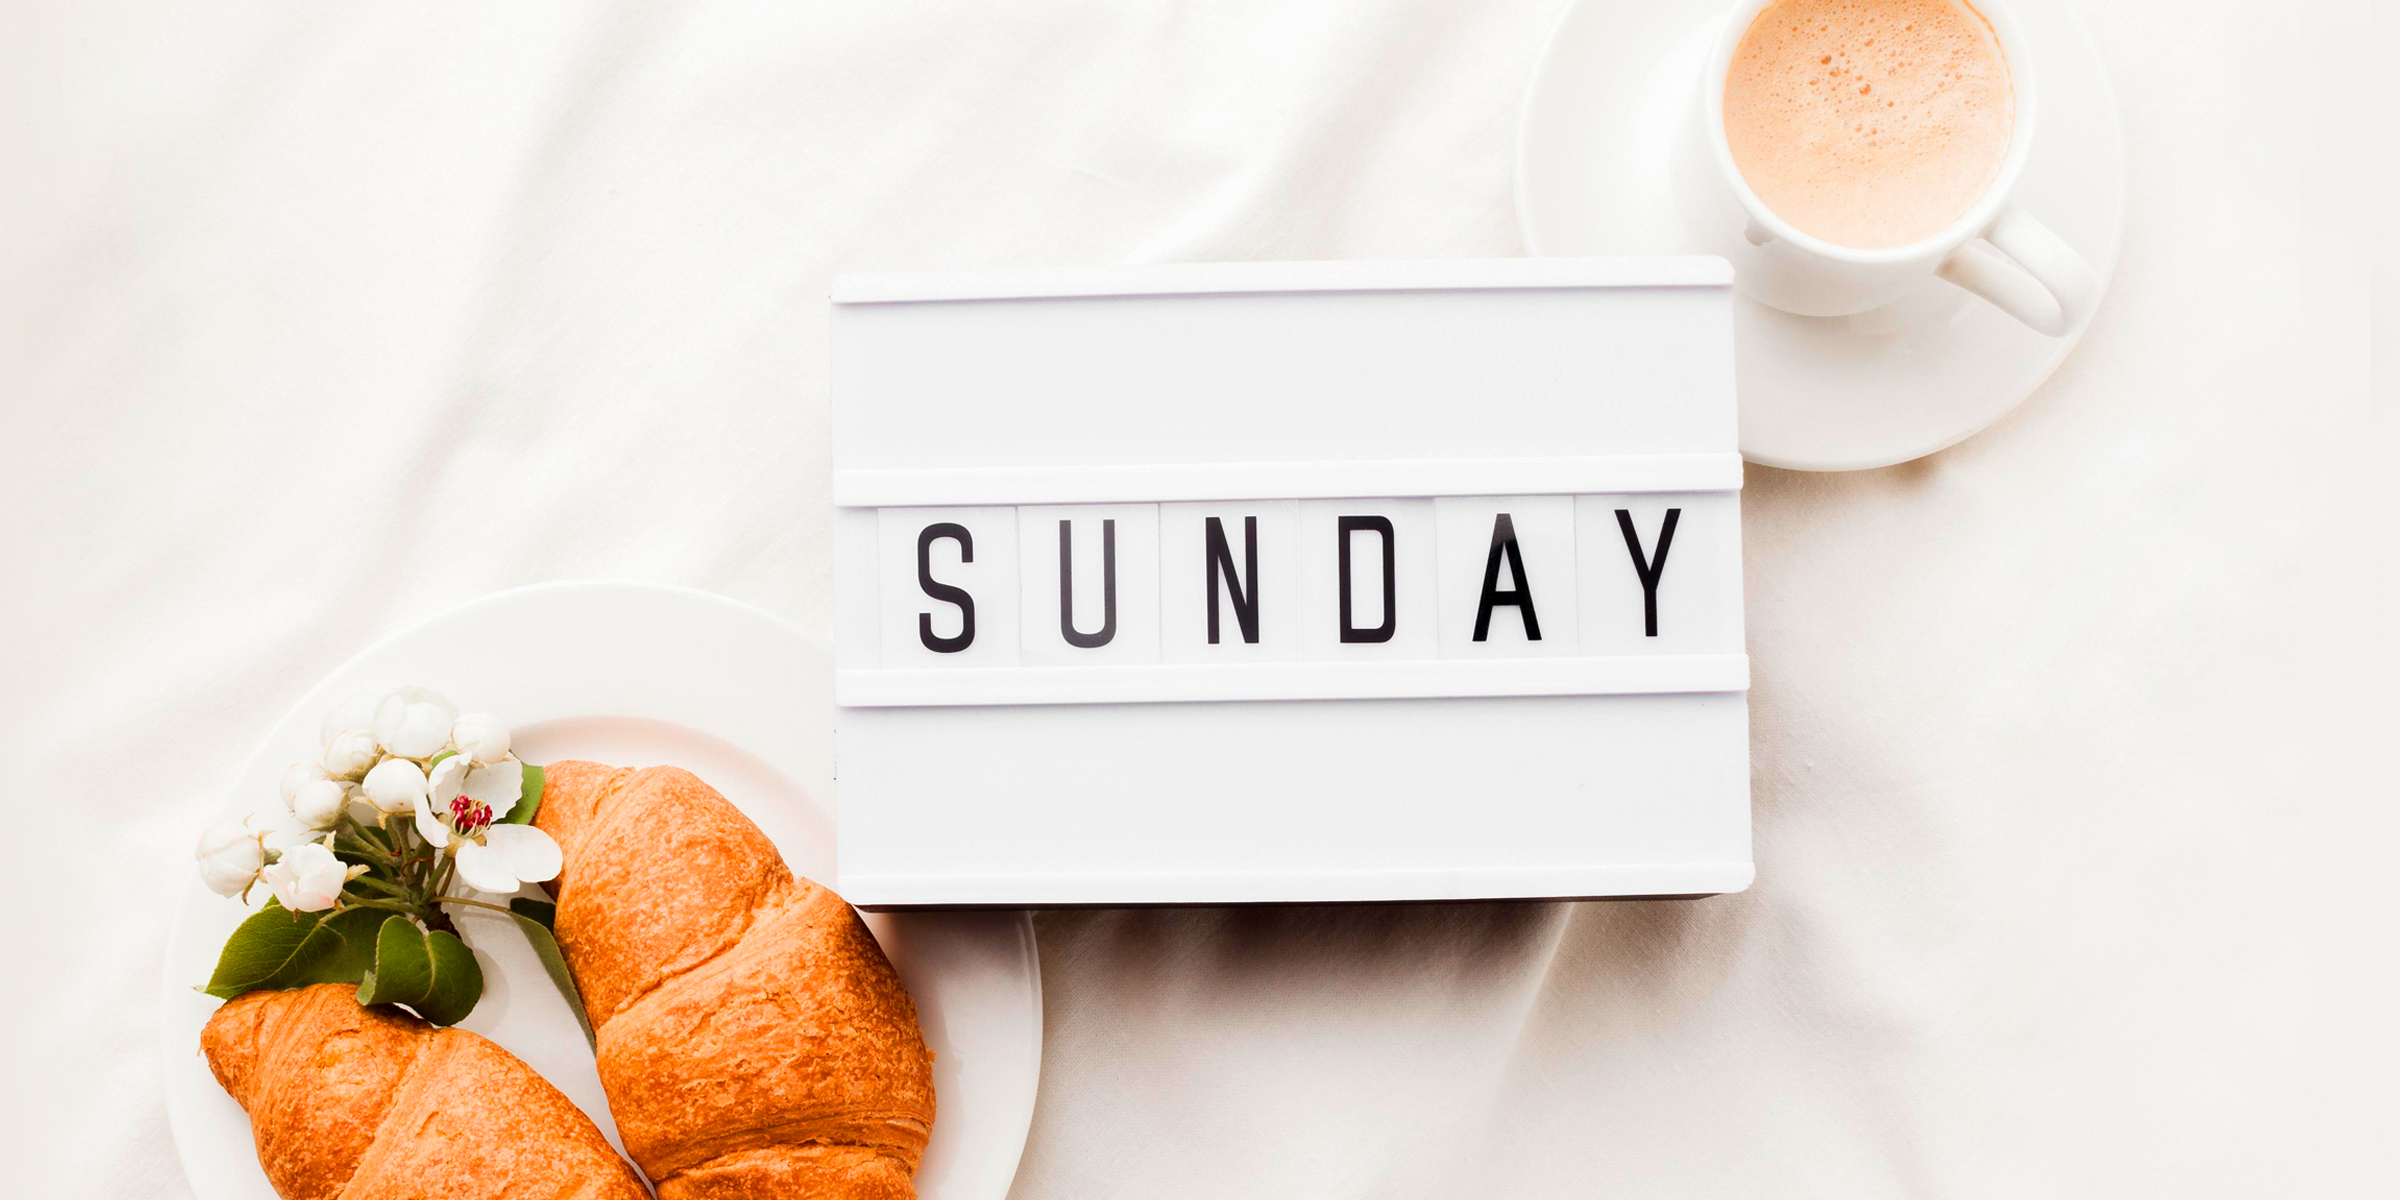 The word Sunday next to a cup of coffee and croissants | Source: Freepik